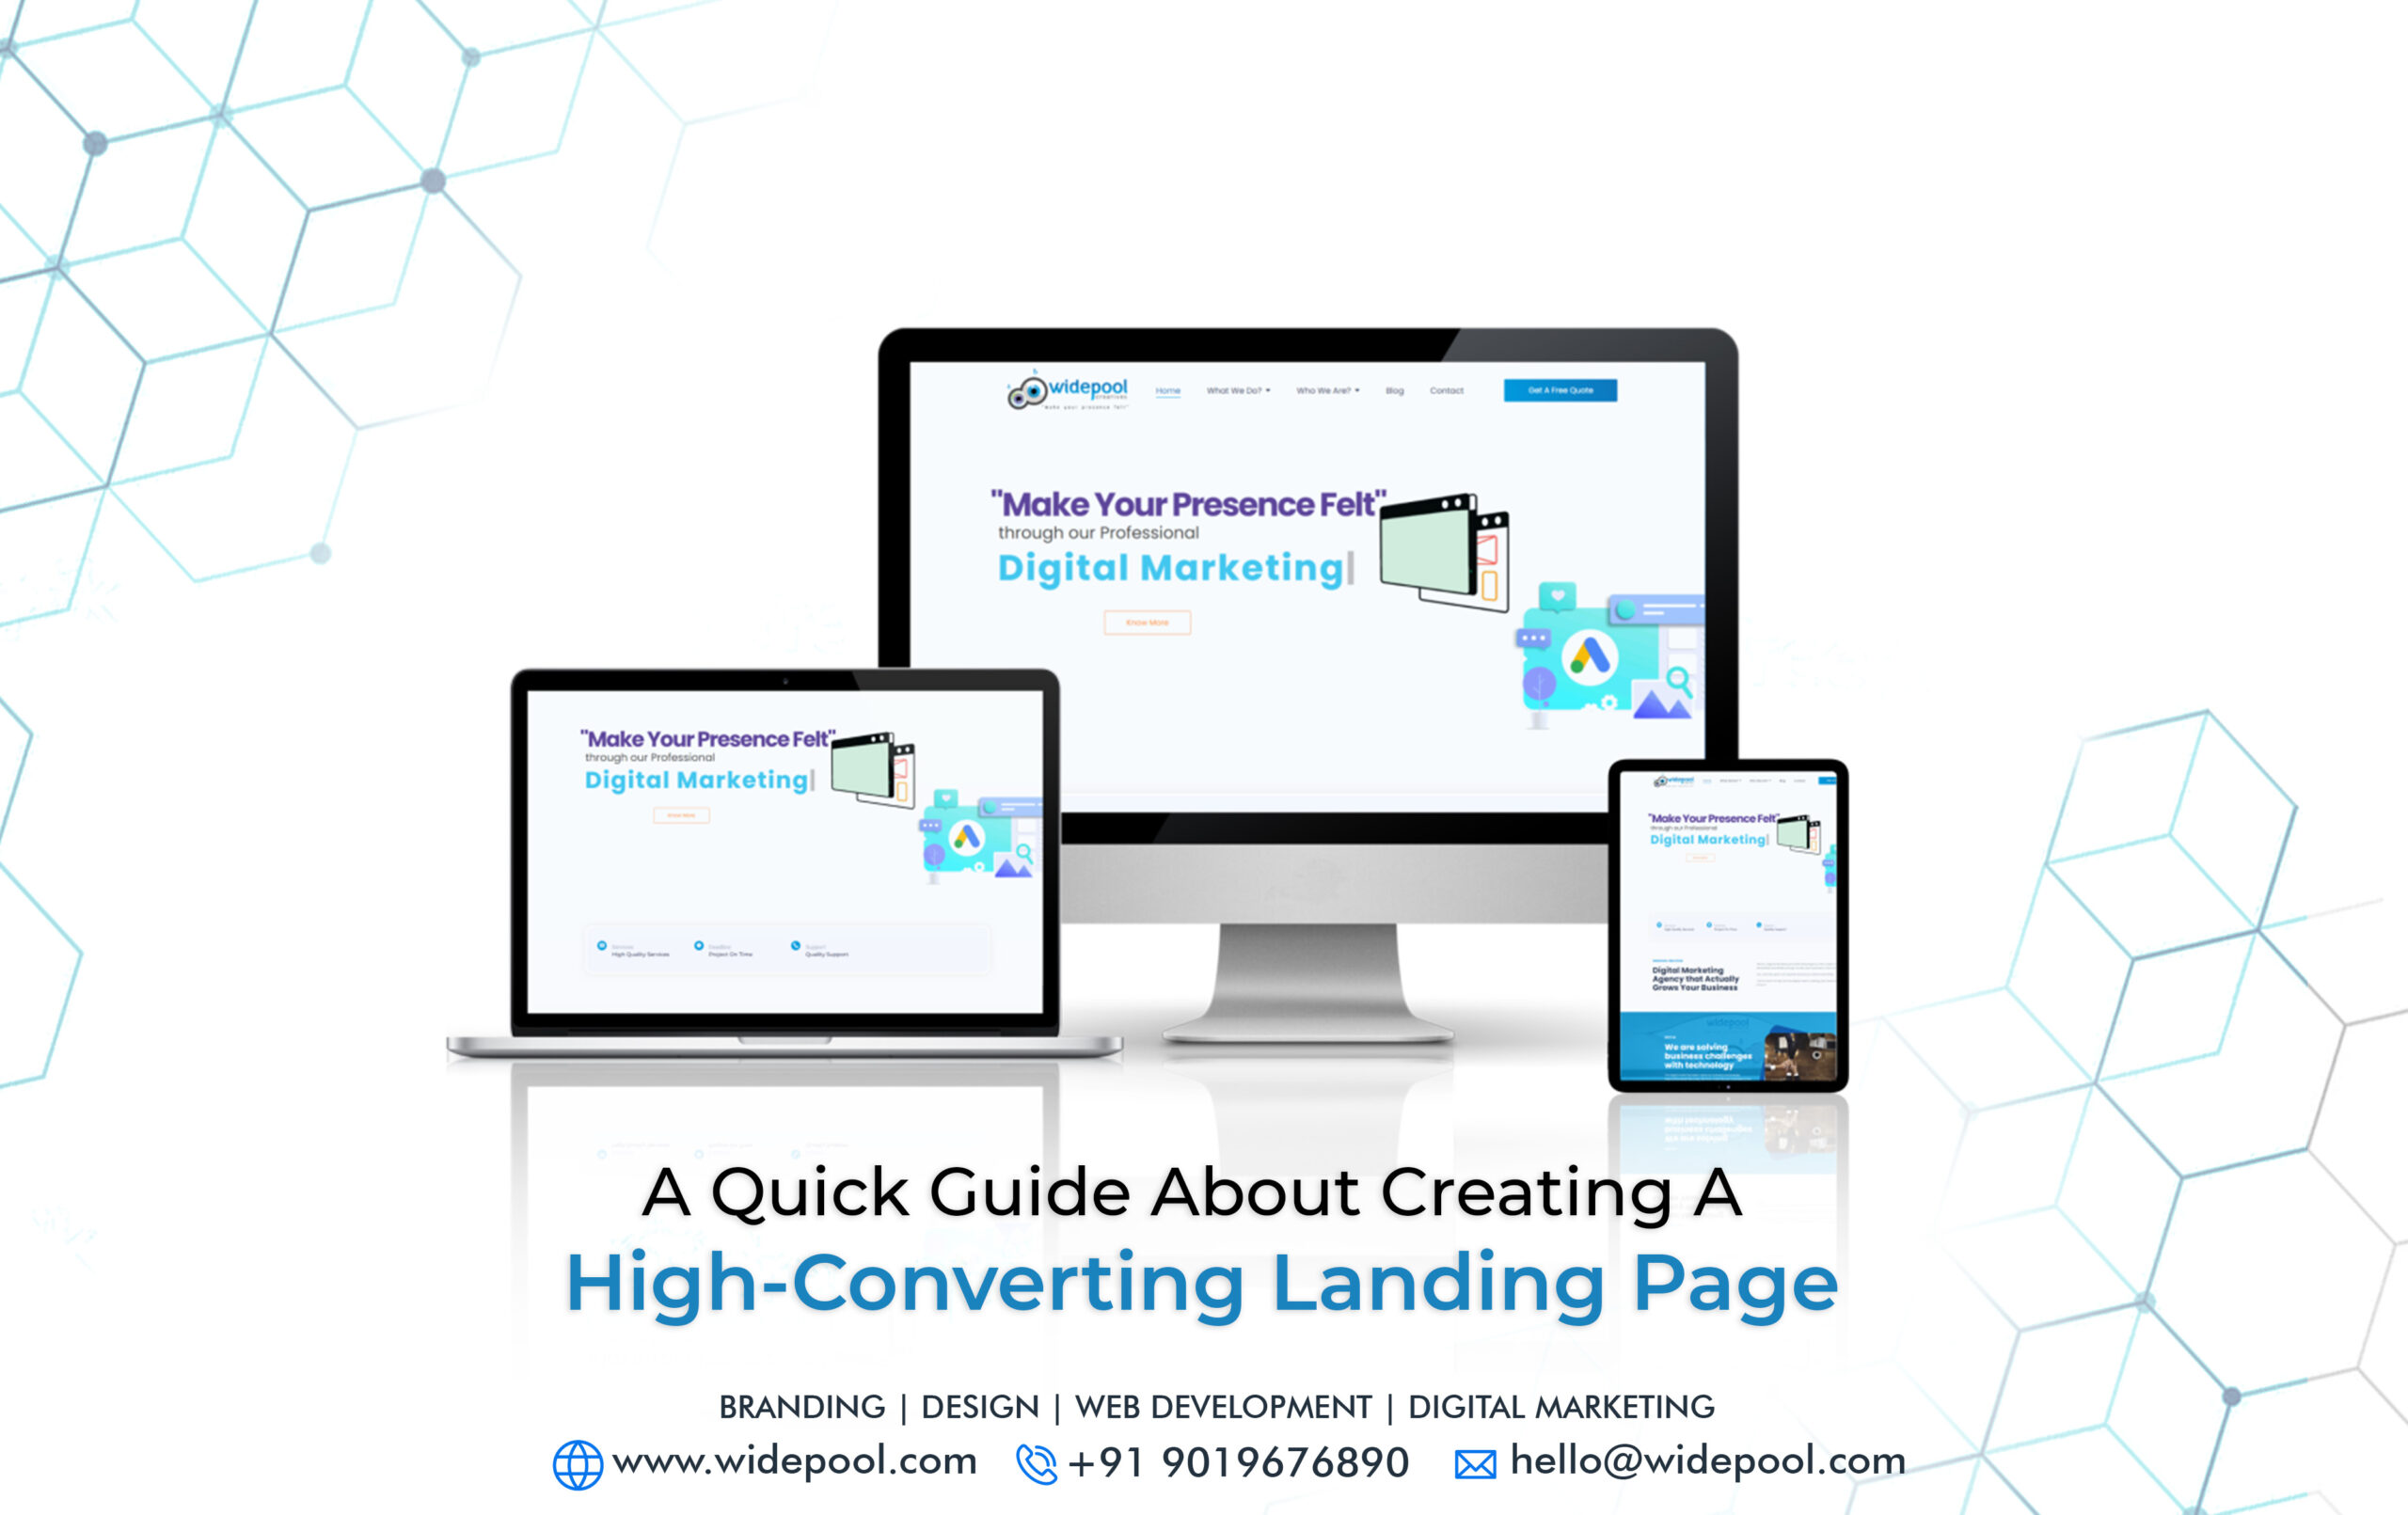 A Quick Guide about Creating a High-Converting Landing Page